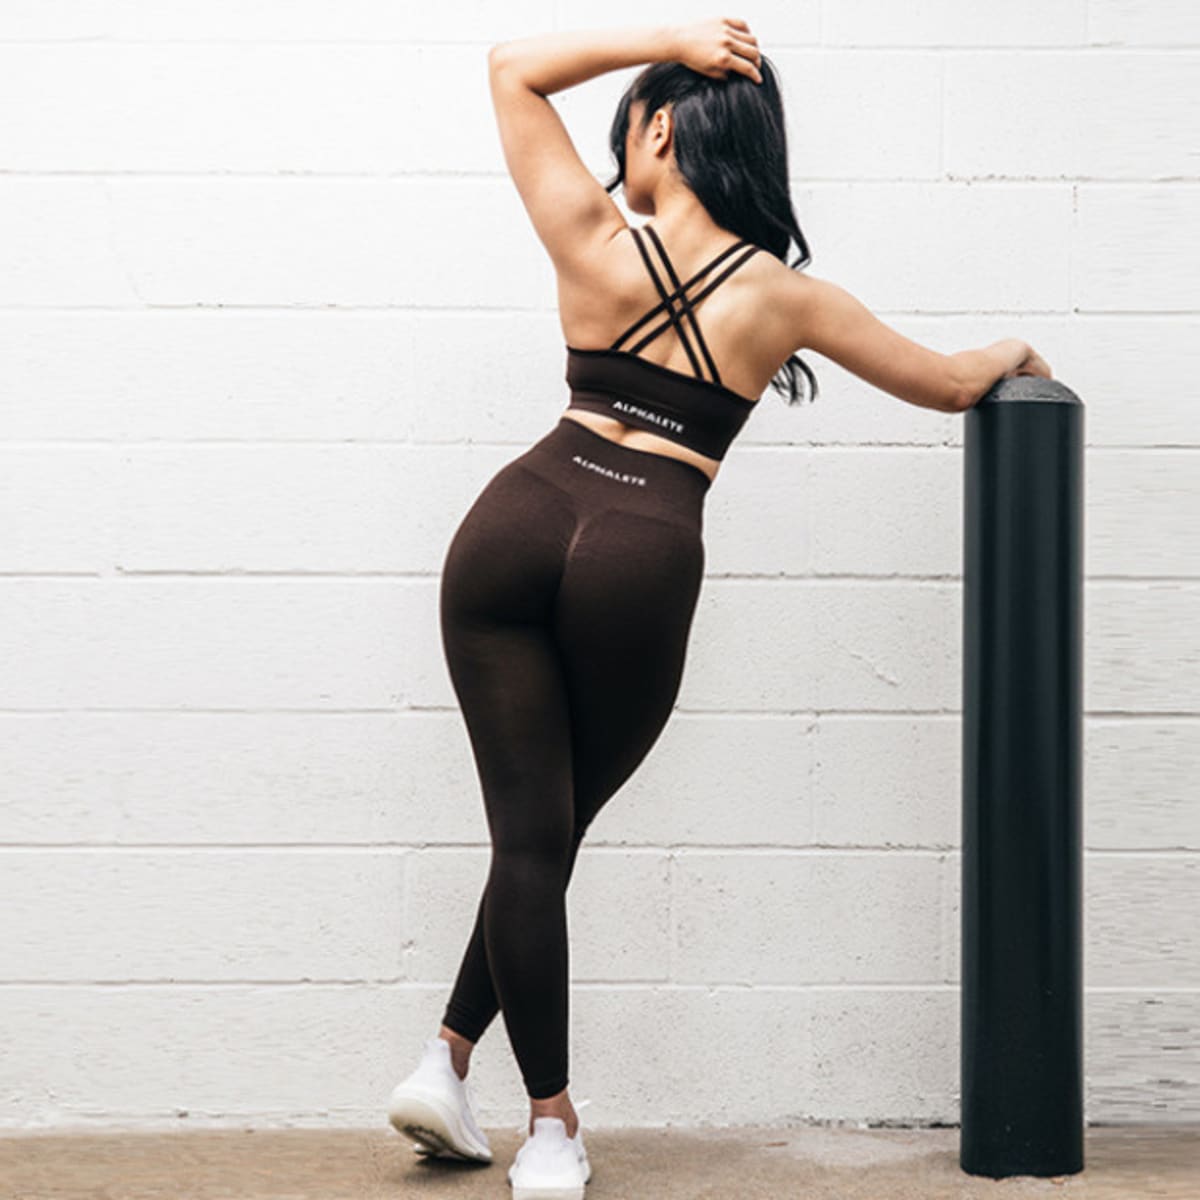 Arena Strength Everything You Could Ever And Our Leggings , 47% OFF